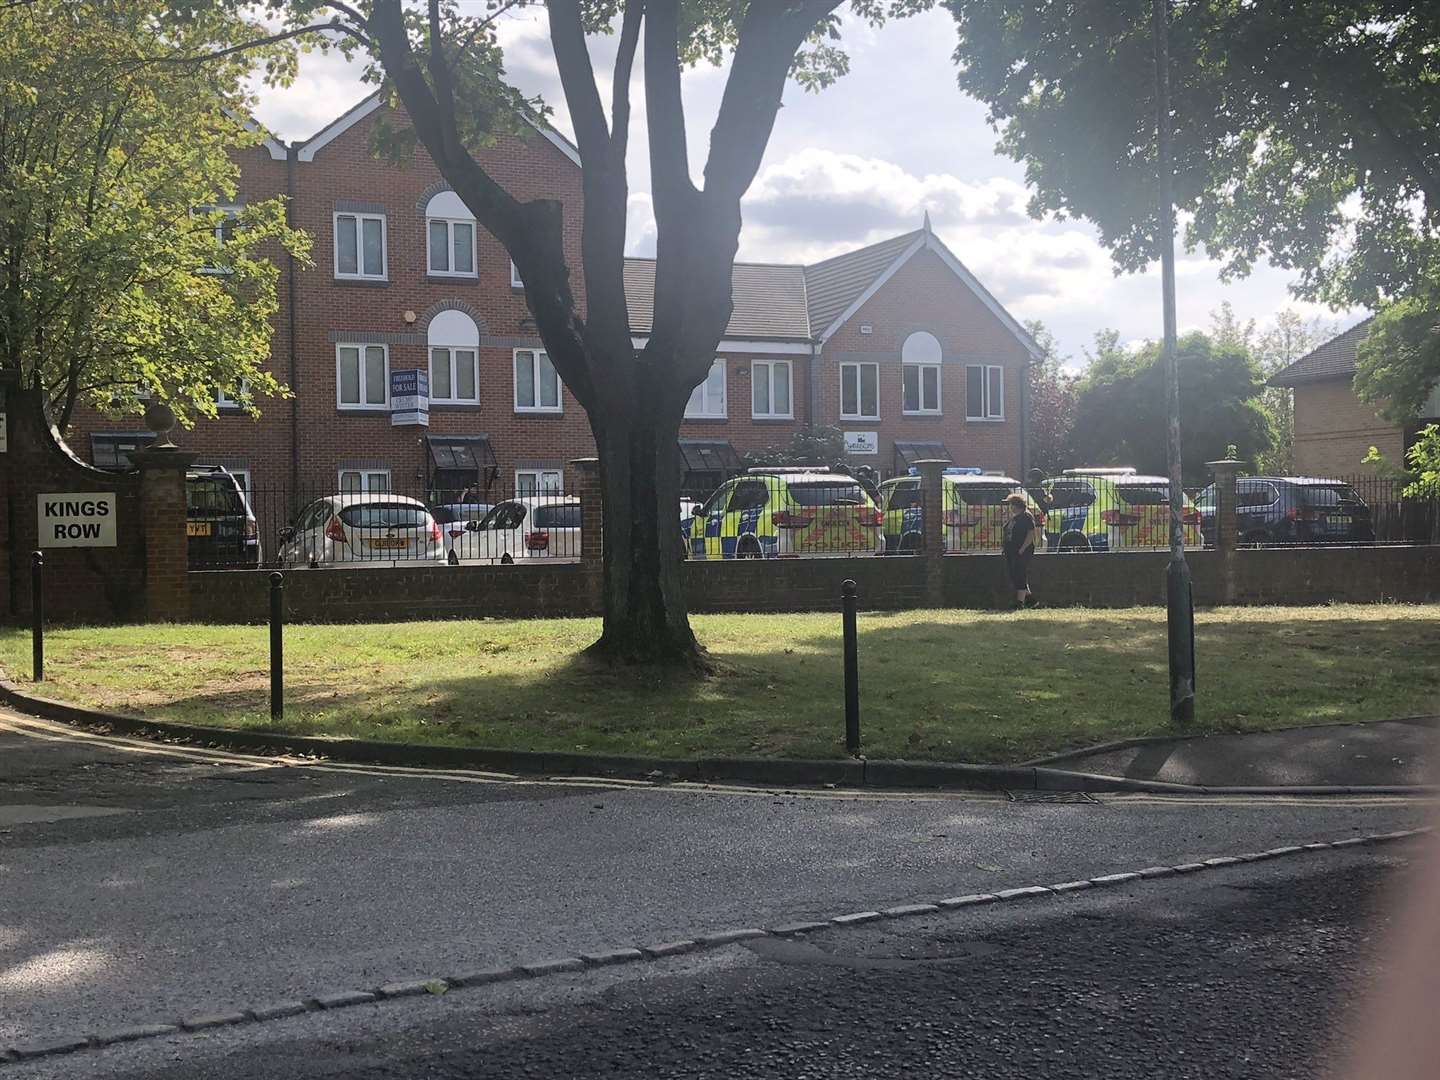 Armed police have been spotted in Kings Row, Armstrong Road. Credit to @rickyw2017 (15898656)